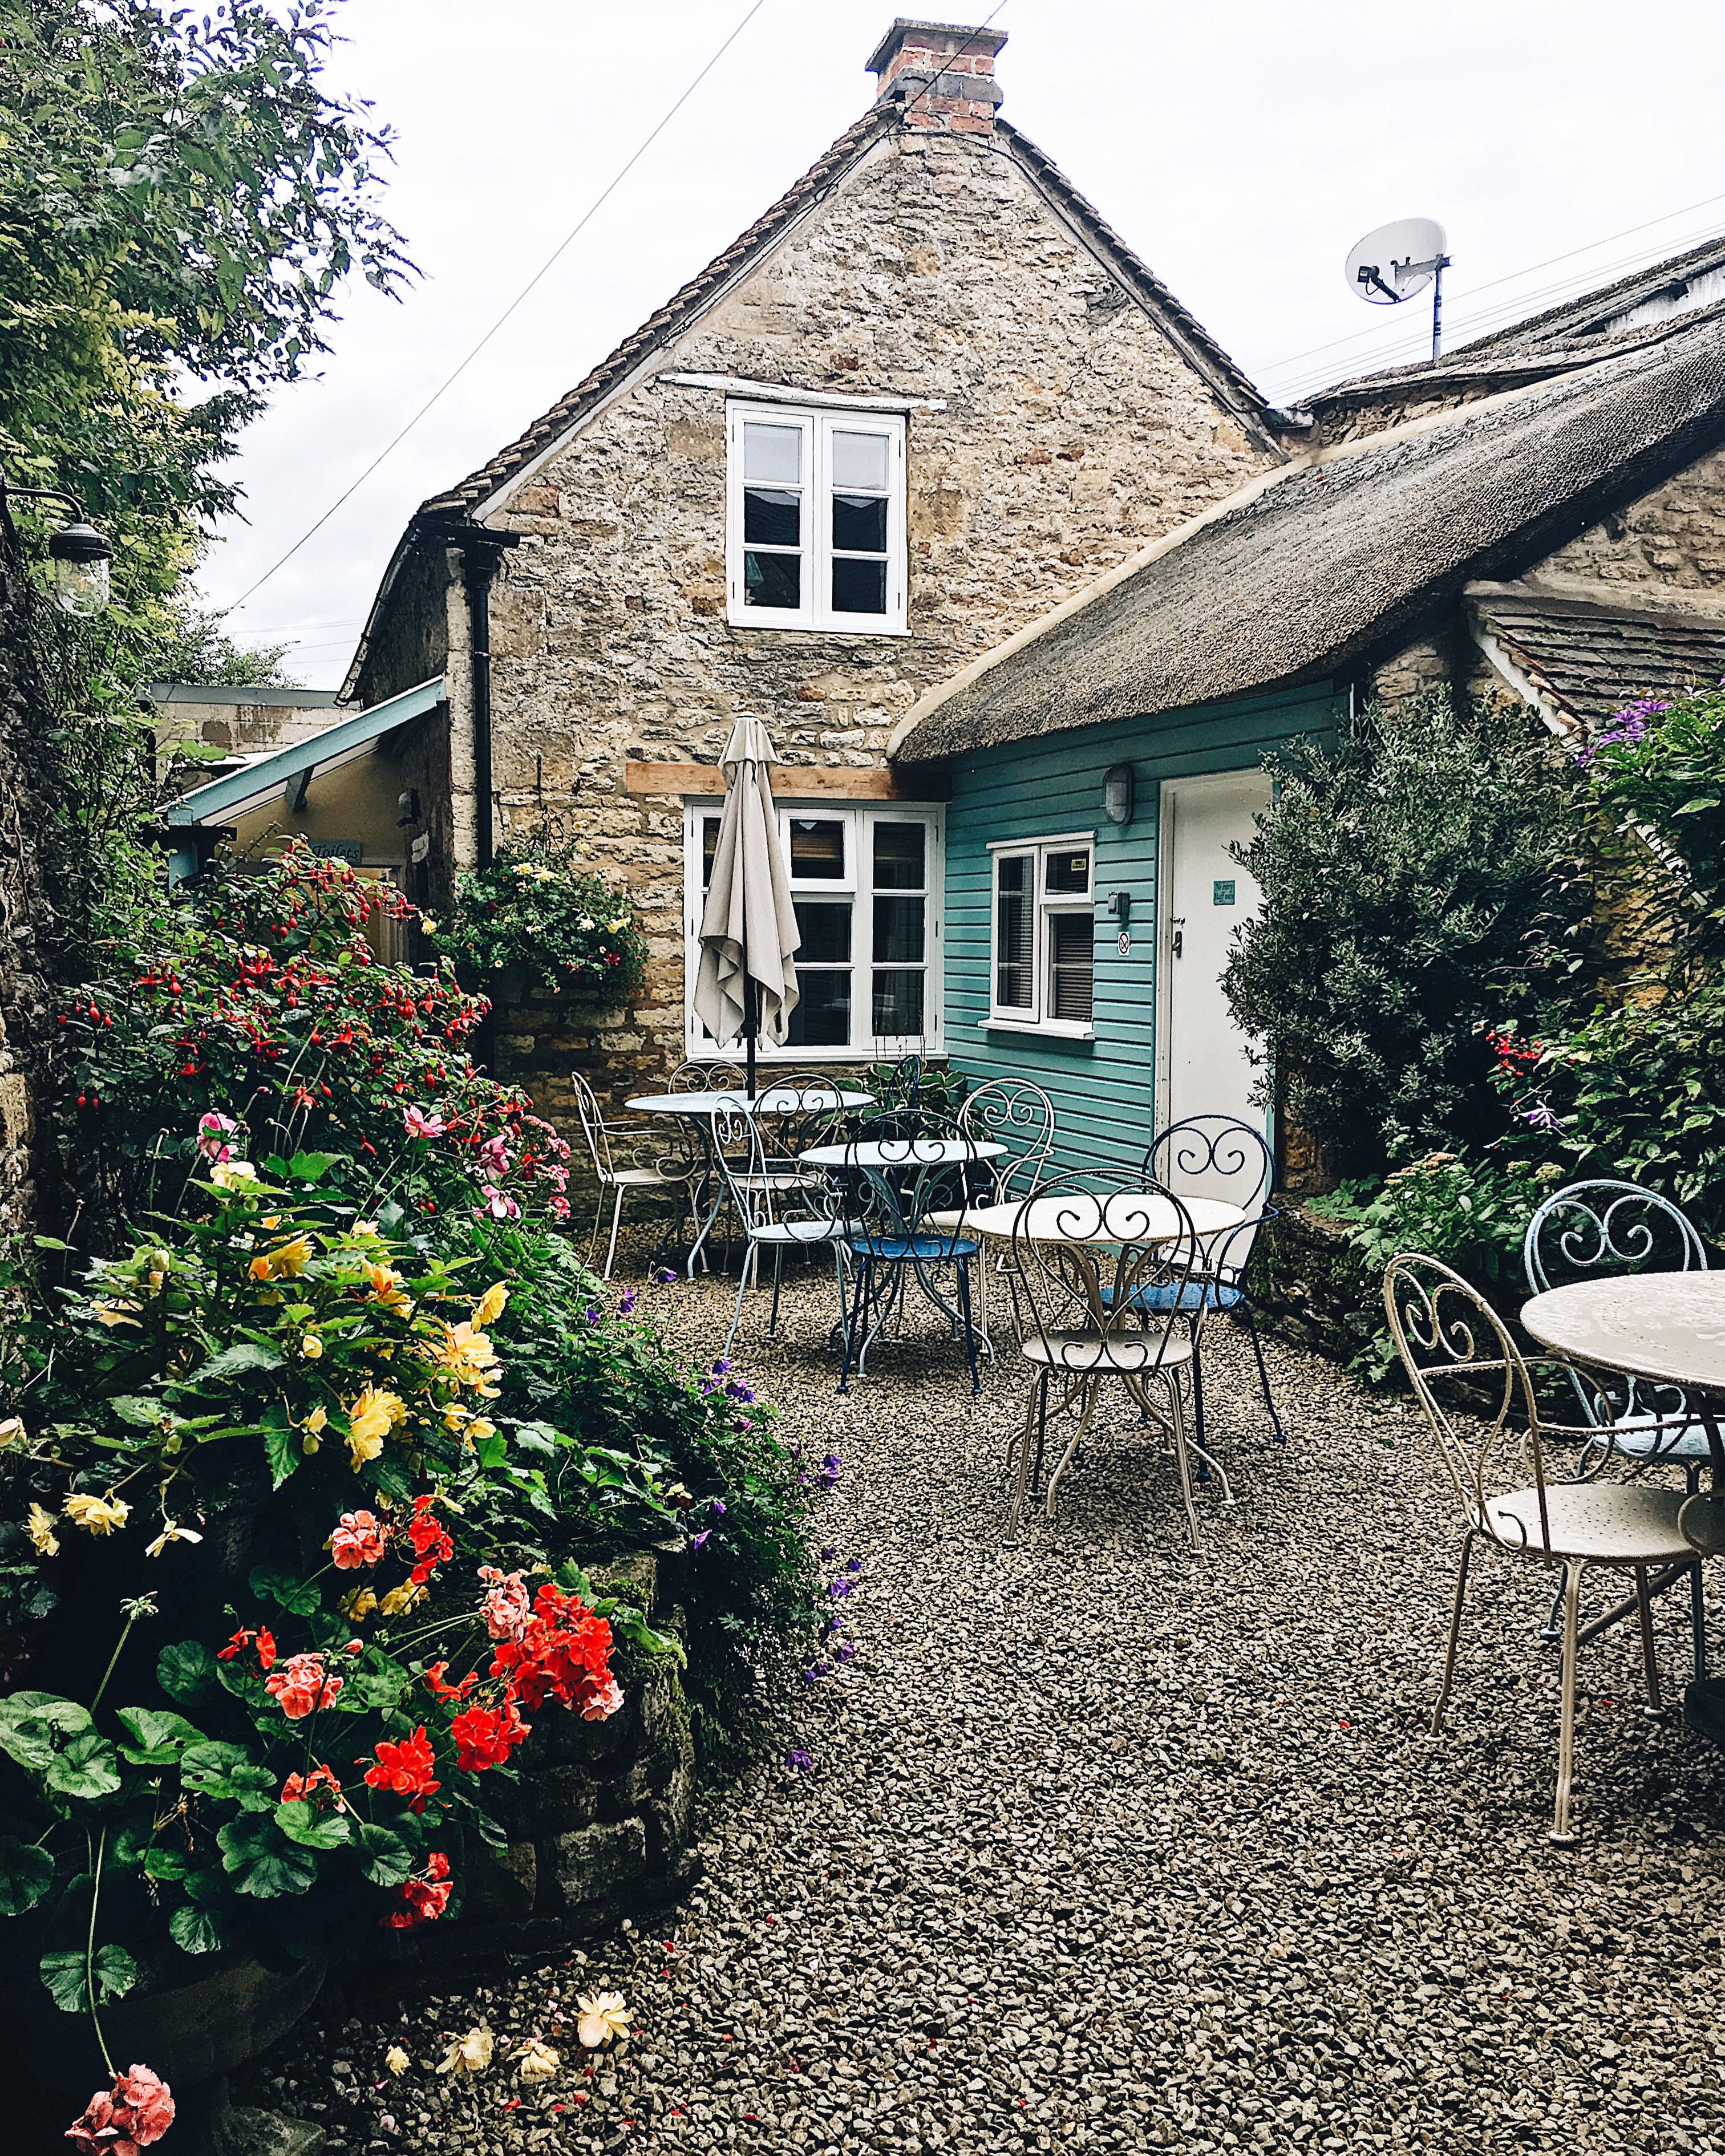 Lucy's tea room garden in Stow-on-the-Wold